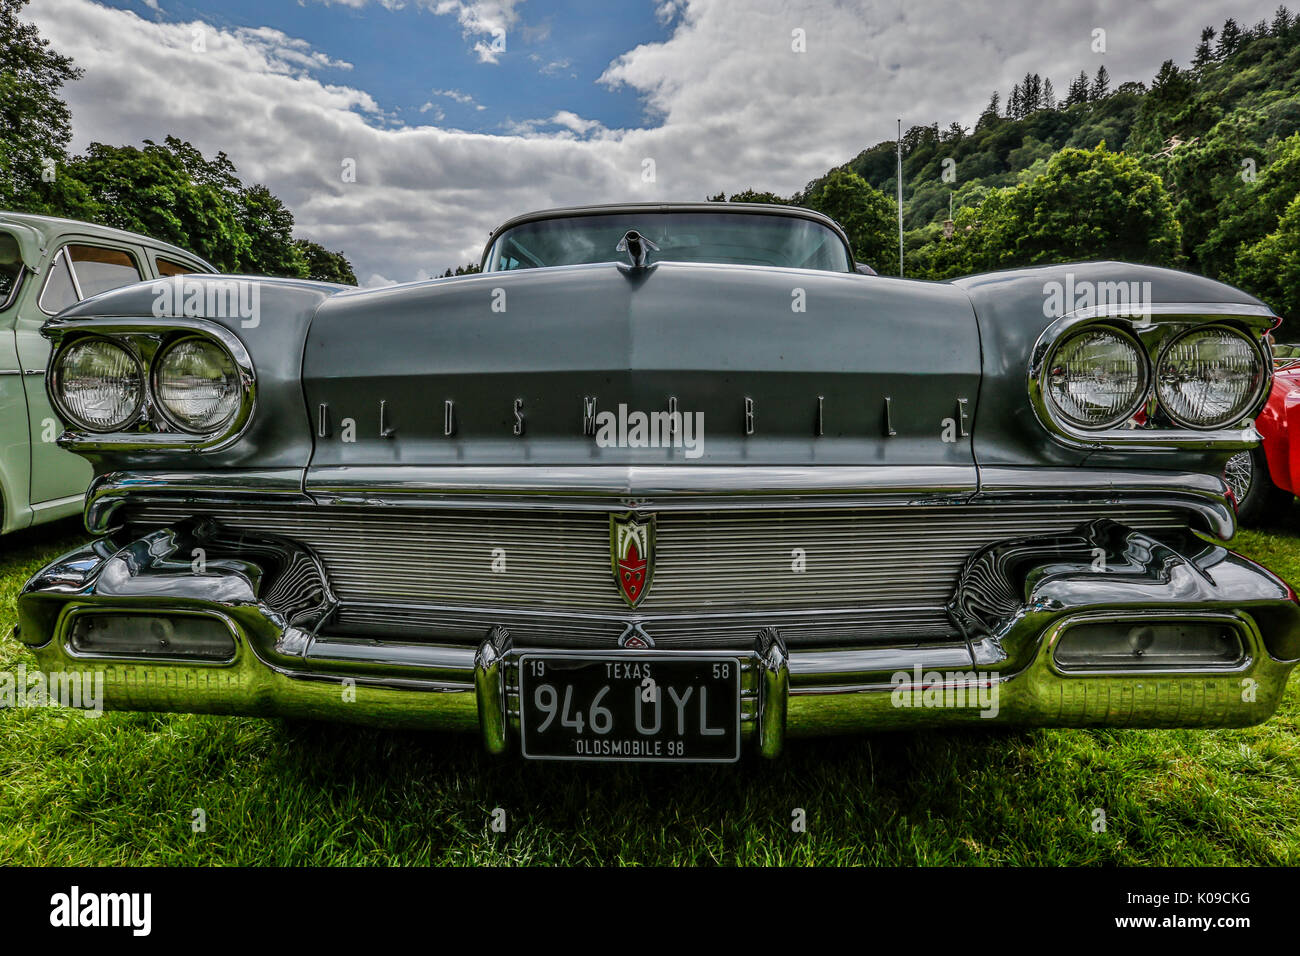 Wales August 2017. North Wales car club car show outdoors. Classic cars from Europe, America and Britain. HDR cars captured with sharp details. Stock Photo